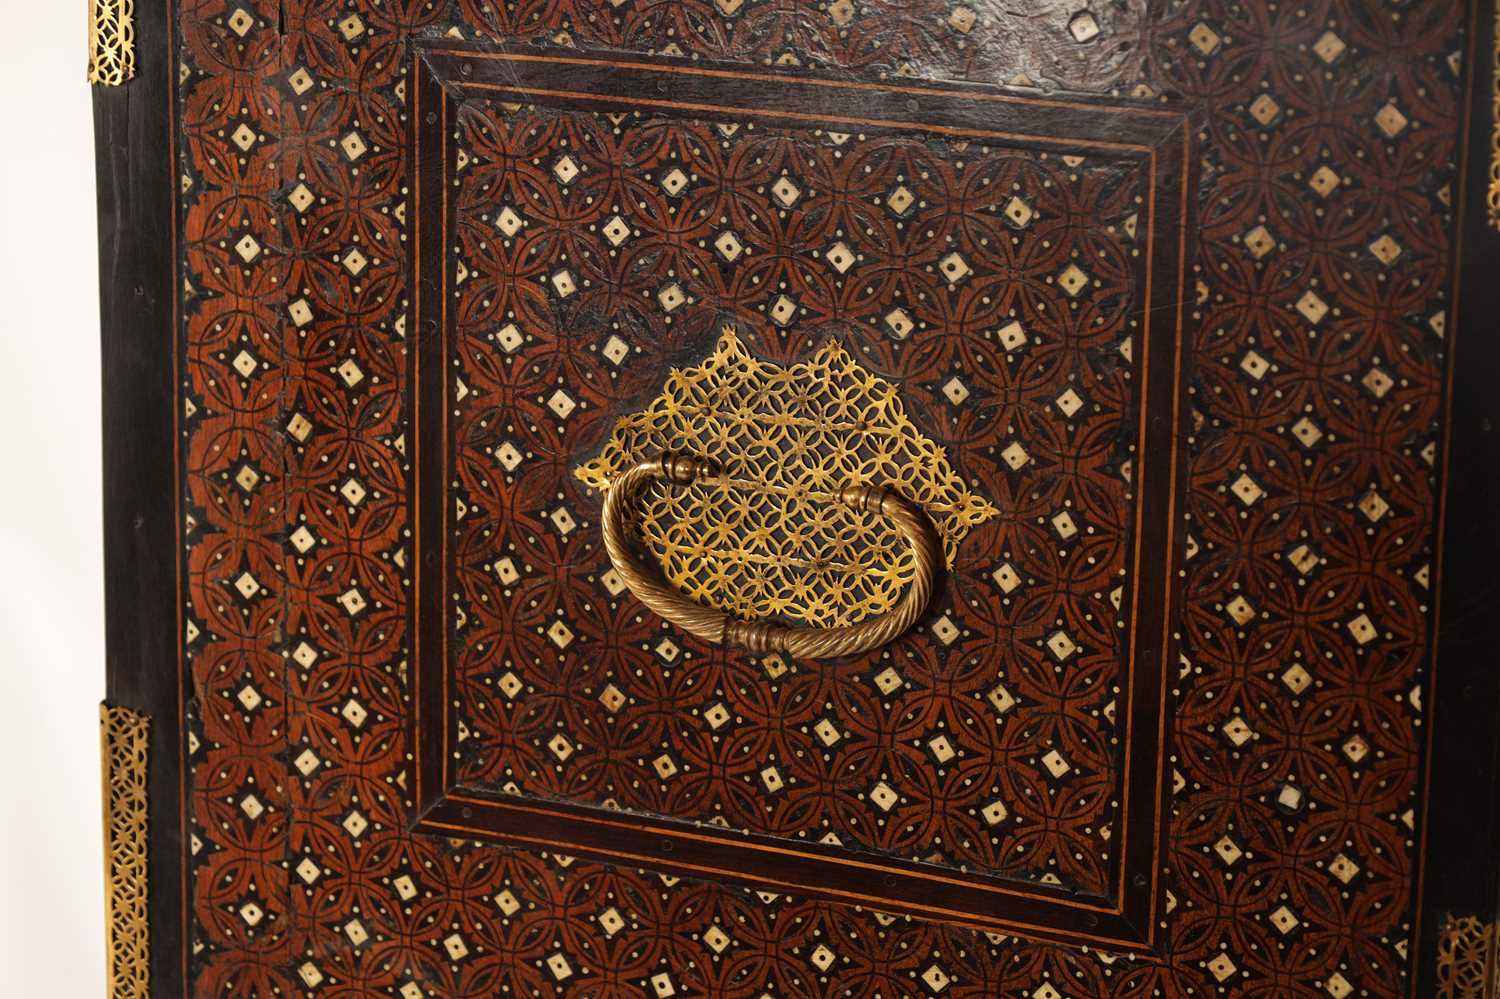 AN IMPORTANT LATE 17TH CENTURY INDO-PORTUGUESE IVORY INLAID PADOUCK AND EBONY COLLECTORS CABINET ON - Image 7 of 16